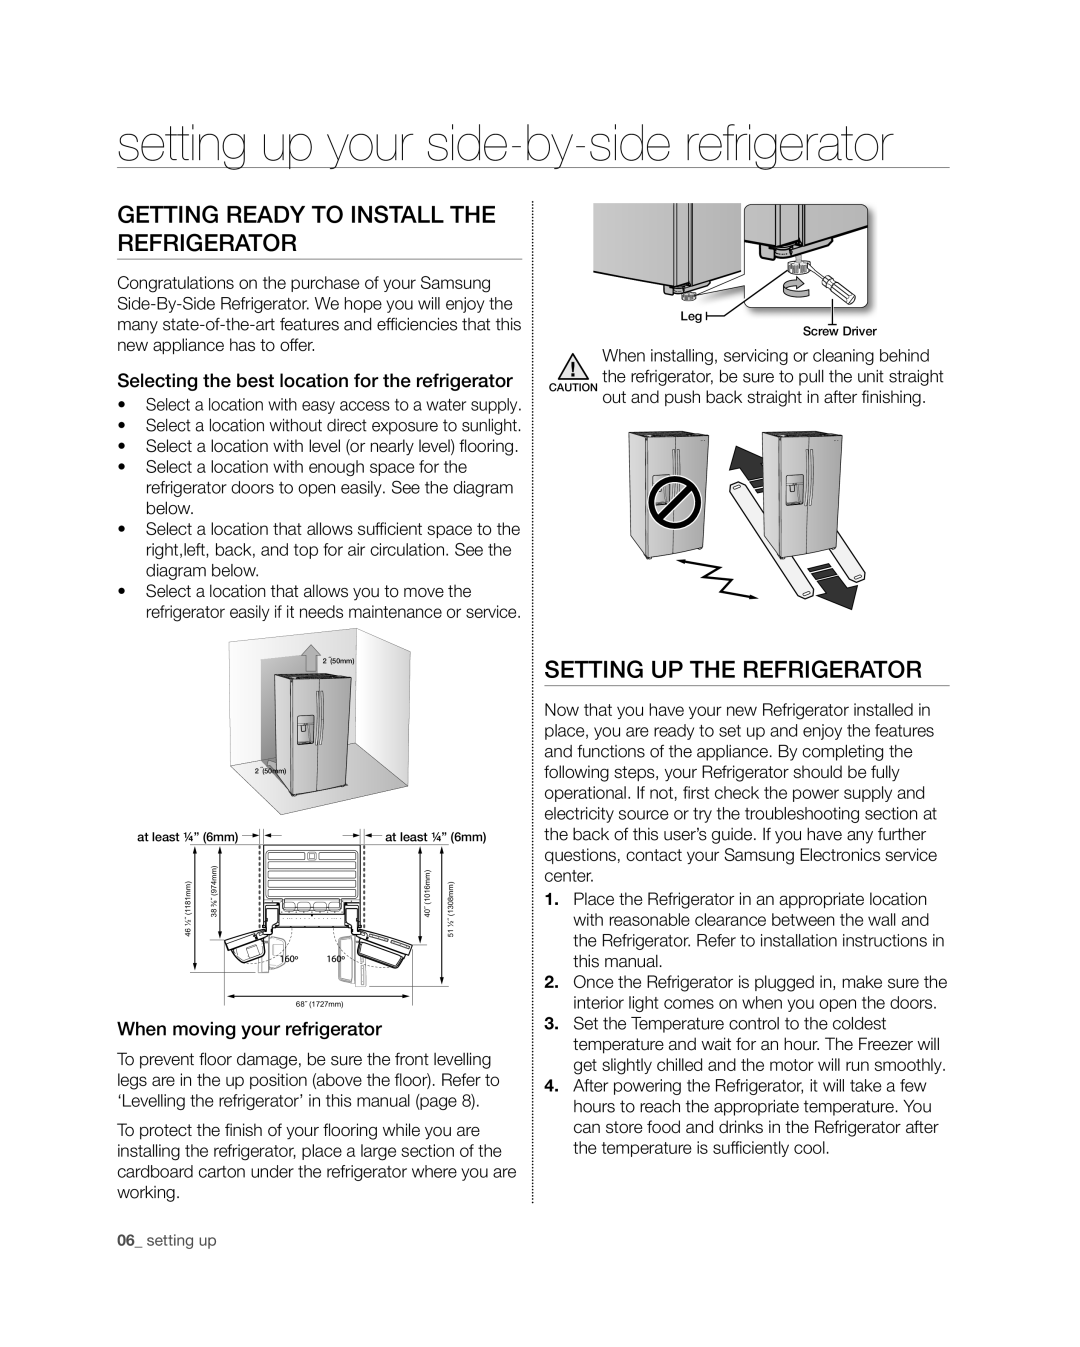 Samsung RSG309** user manual setting up your side-by-side refrigerator, Getting ready to install the refrigerator 